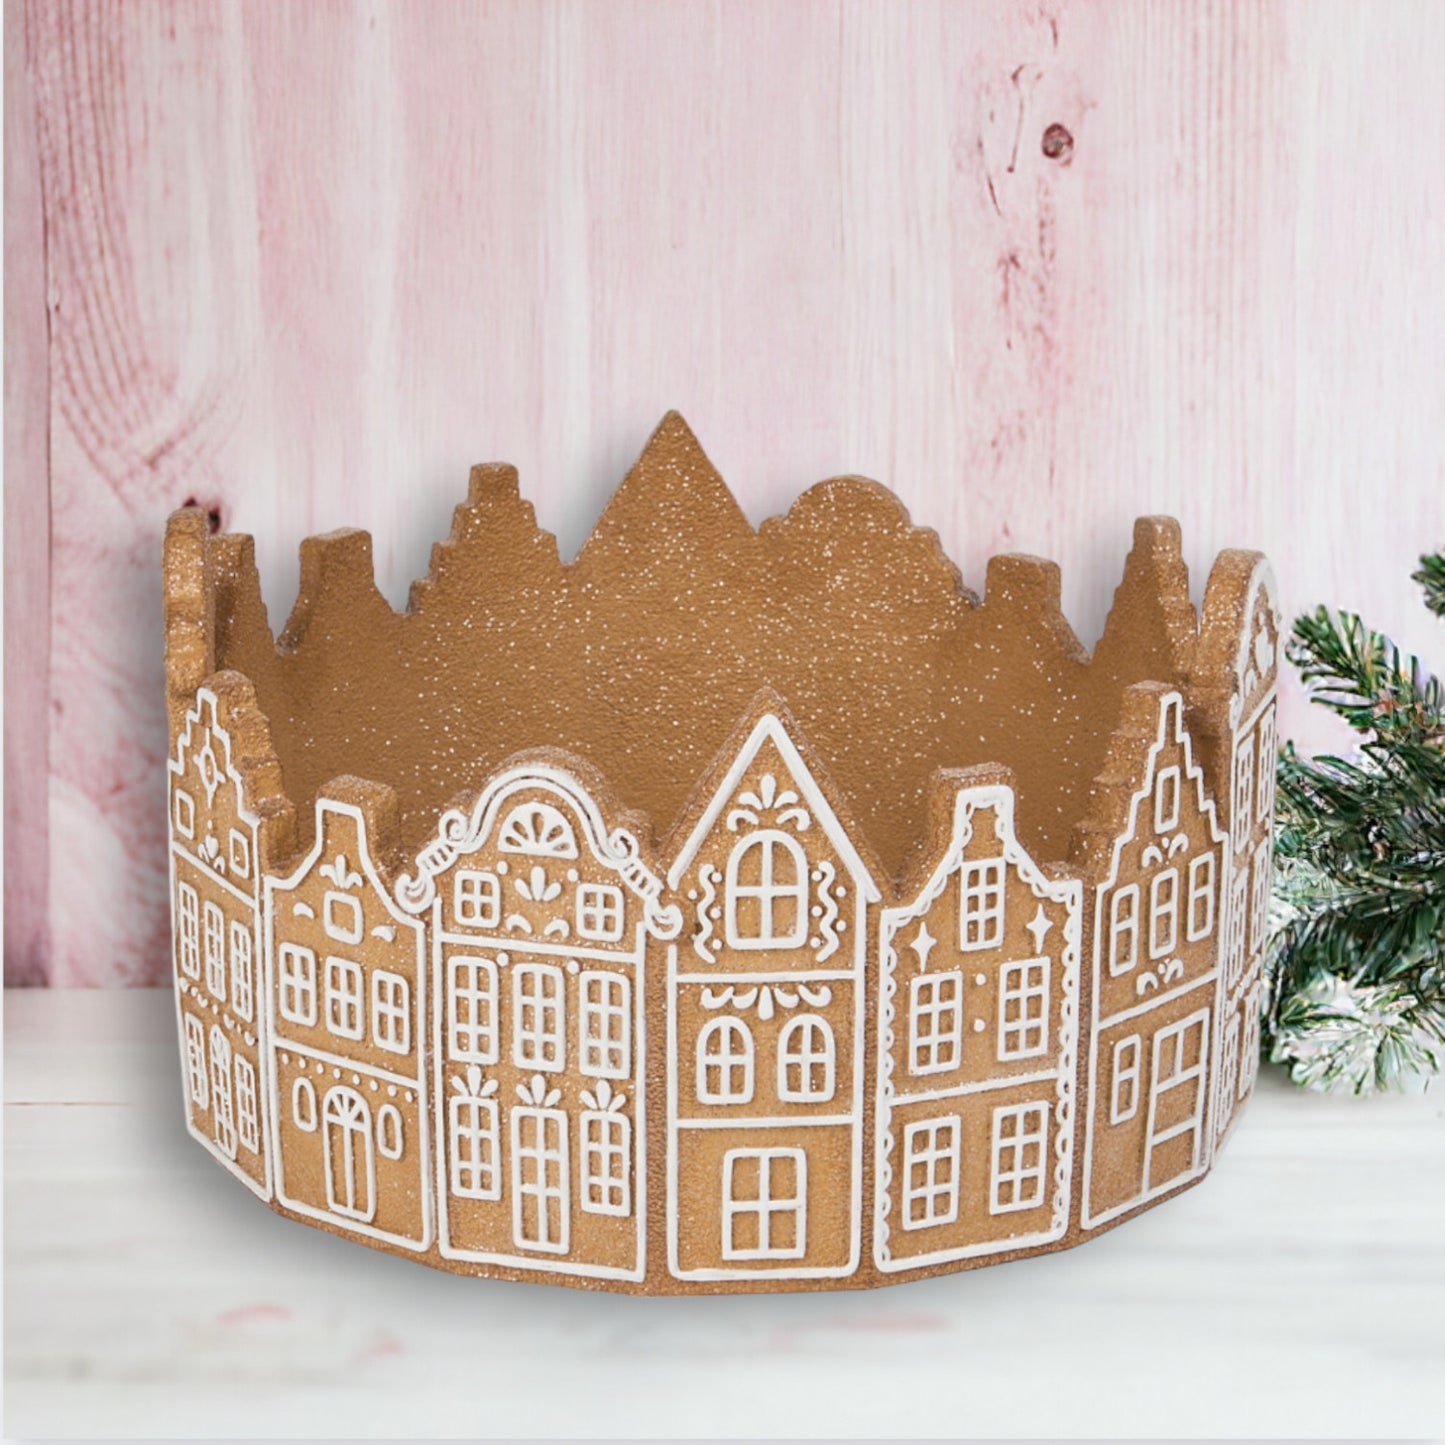 December Diamonds Gingerbread Village 10.5-Inch Gingerbread Houses Container